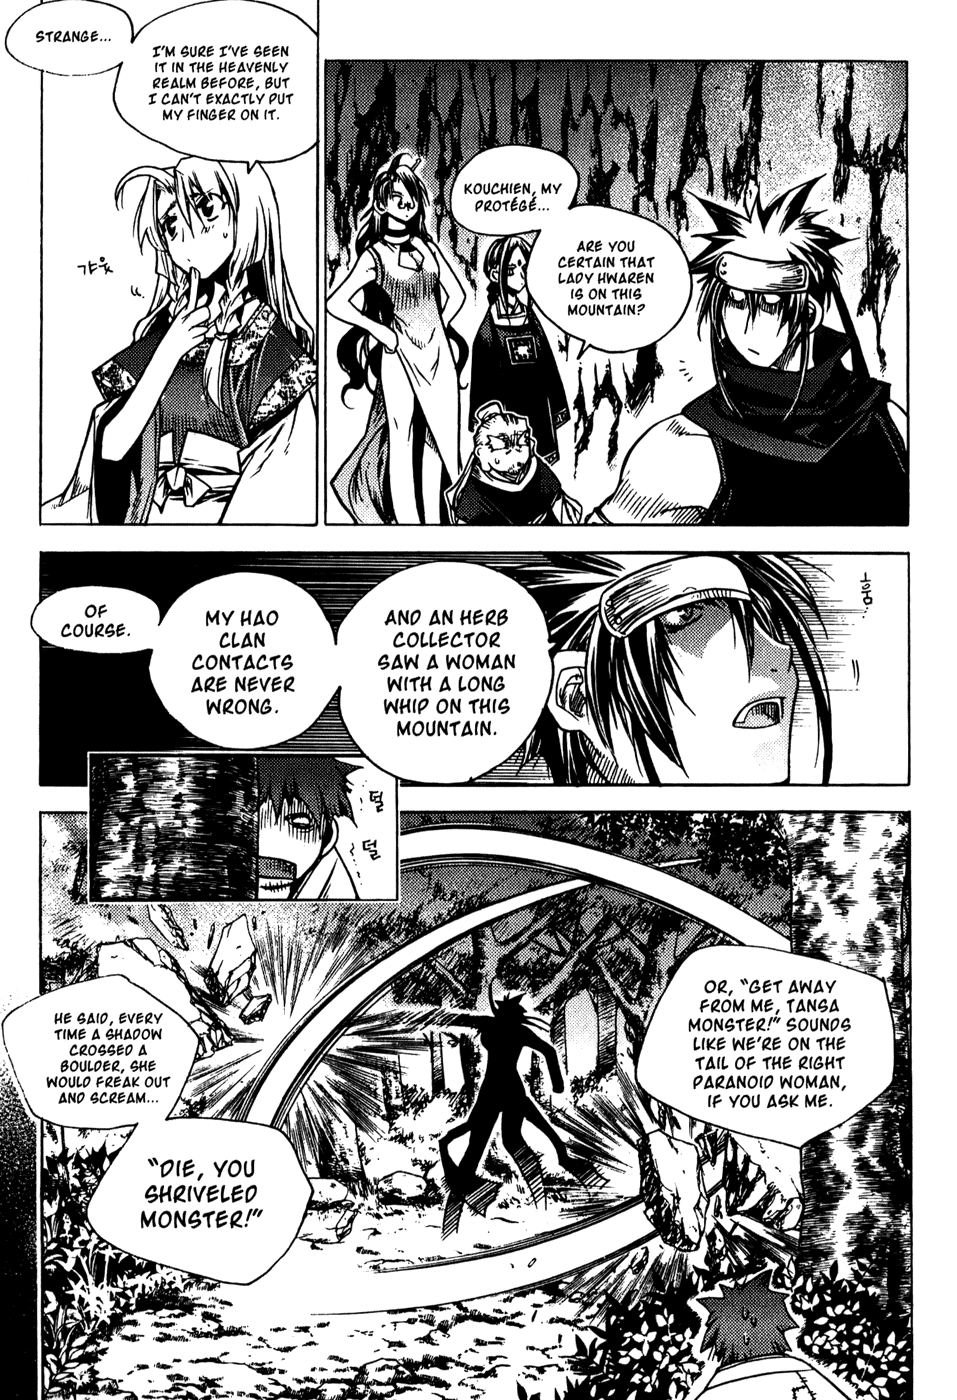 Chronicles of the Cursed Sword Vol. 19 Ch. 77 Sealing the Heavenly Realm